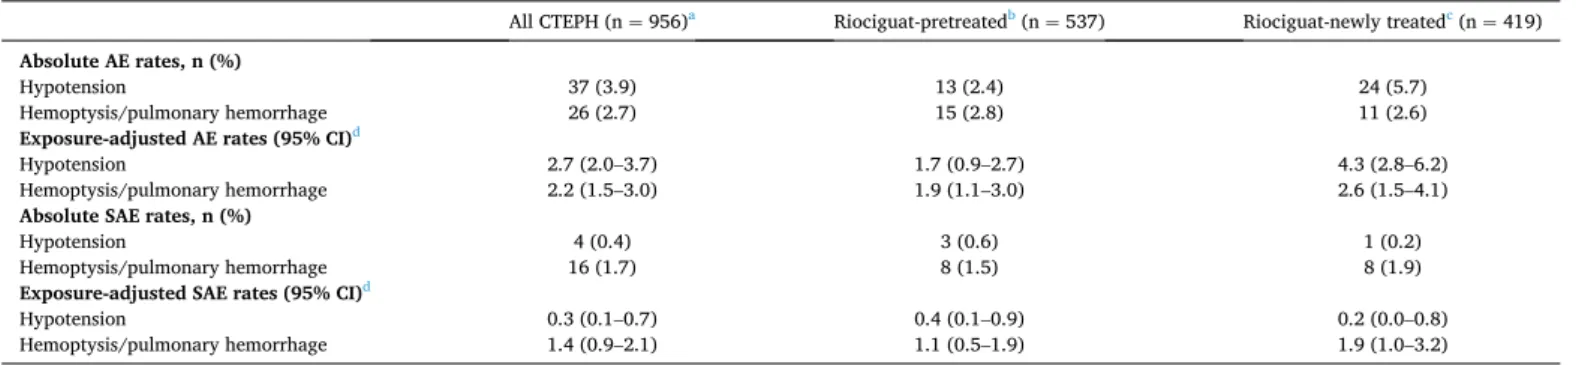 Fig. 4. Kaplan − Meier survival curves for riociguat-newly treated and riociguat-pretreated patients